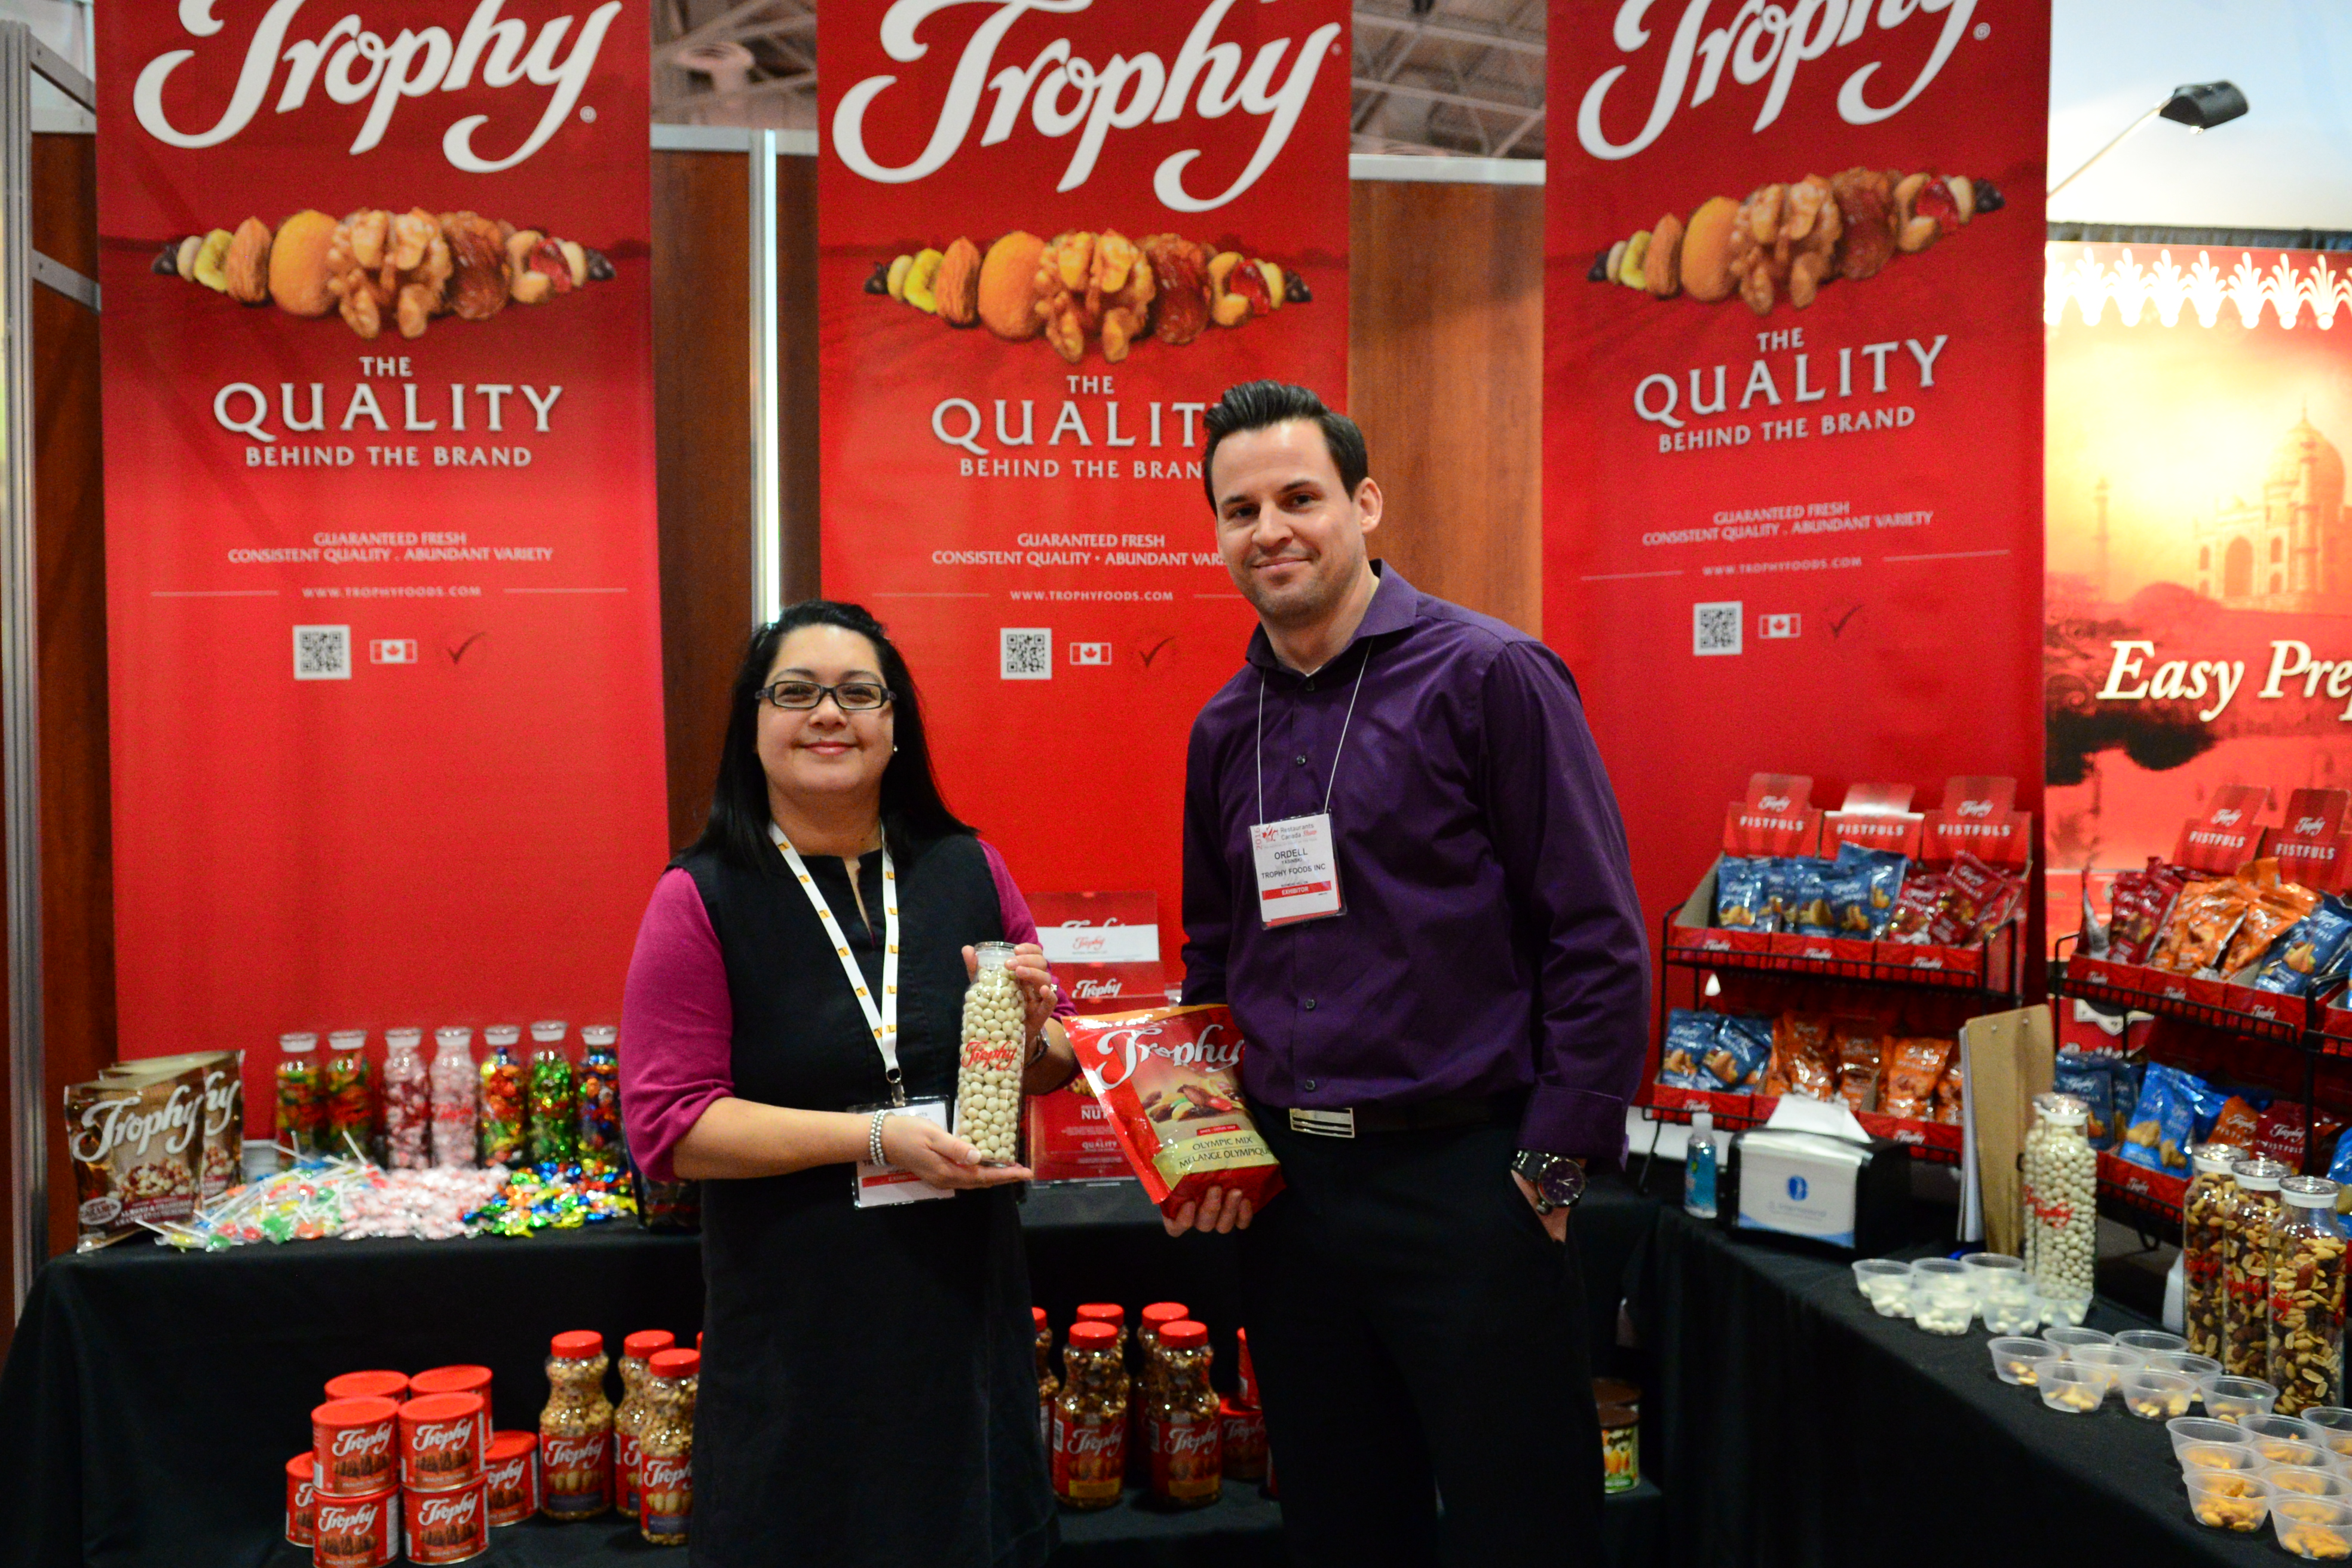 Invest BN began working with Trophy Foods in January 2014 on their US expansion. Their new facility, named Redland Foods Corp., is now located in Cheektowaga, NY